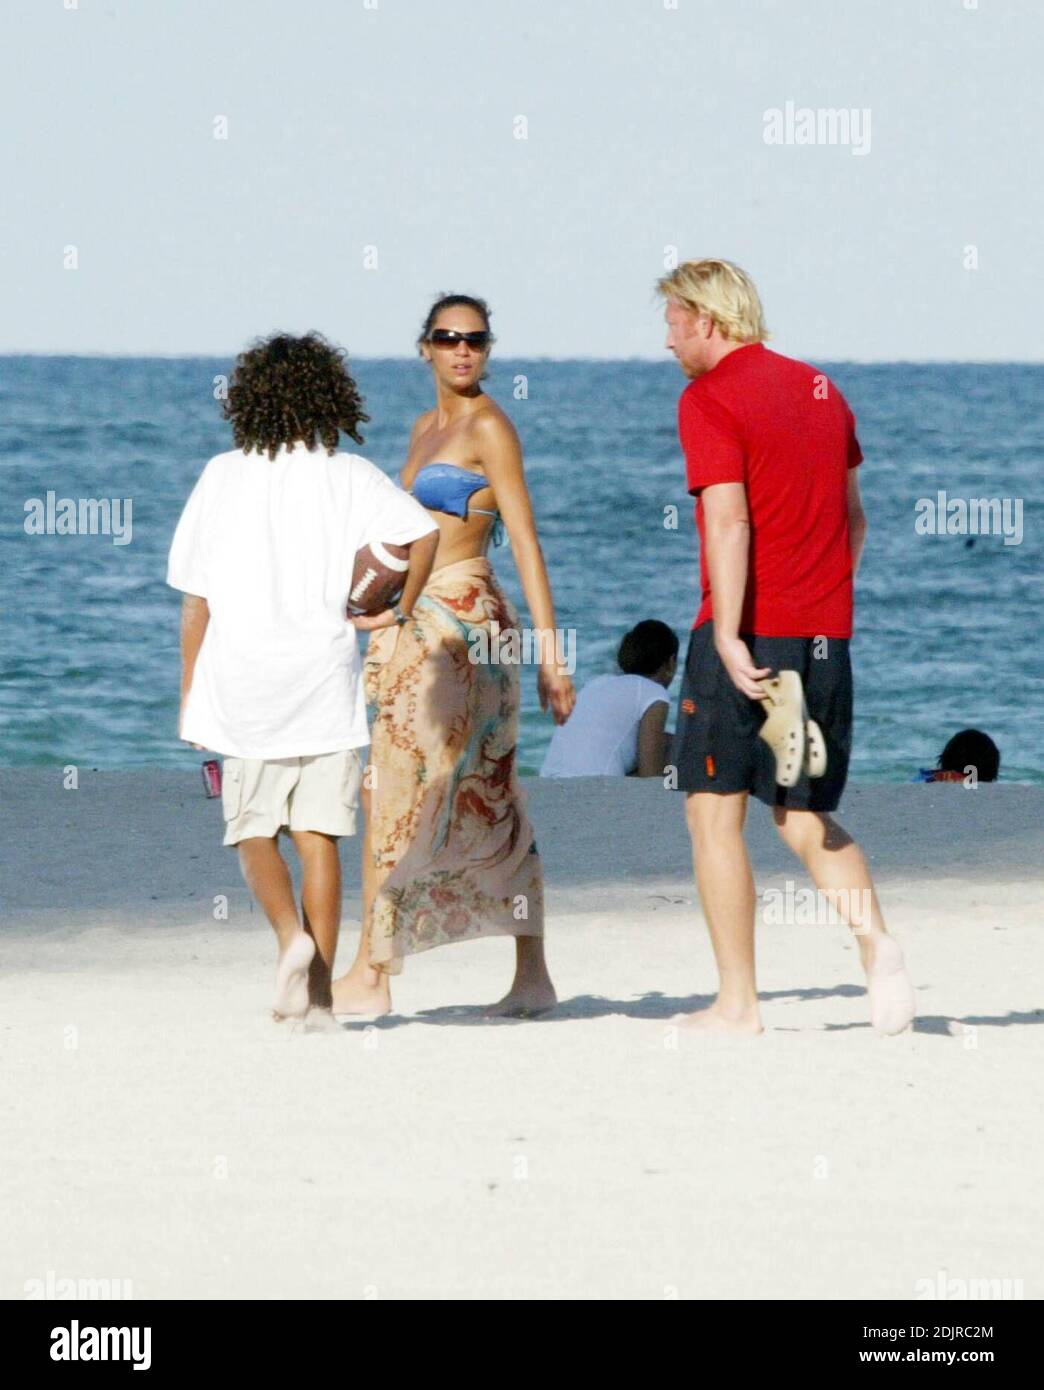 Sharlely Becker's gold bikini struggles to contain her post-baby curves and  almost lost her bikini top following a swim with Boris. Miami, FL. 9/3/10  Stock Photo - Alamy